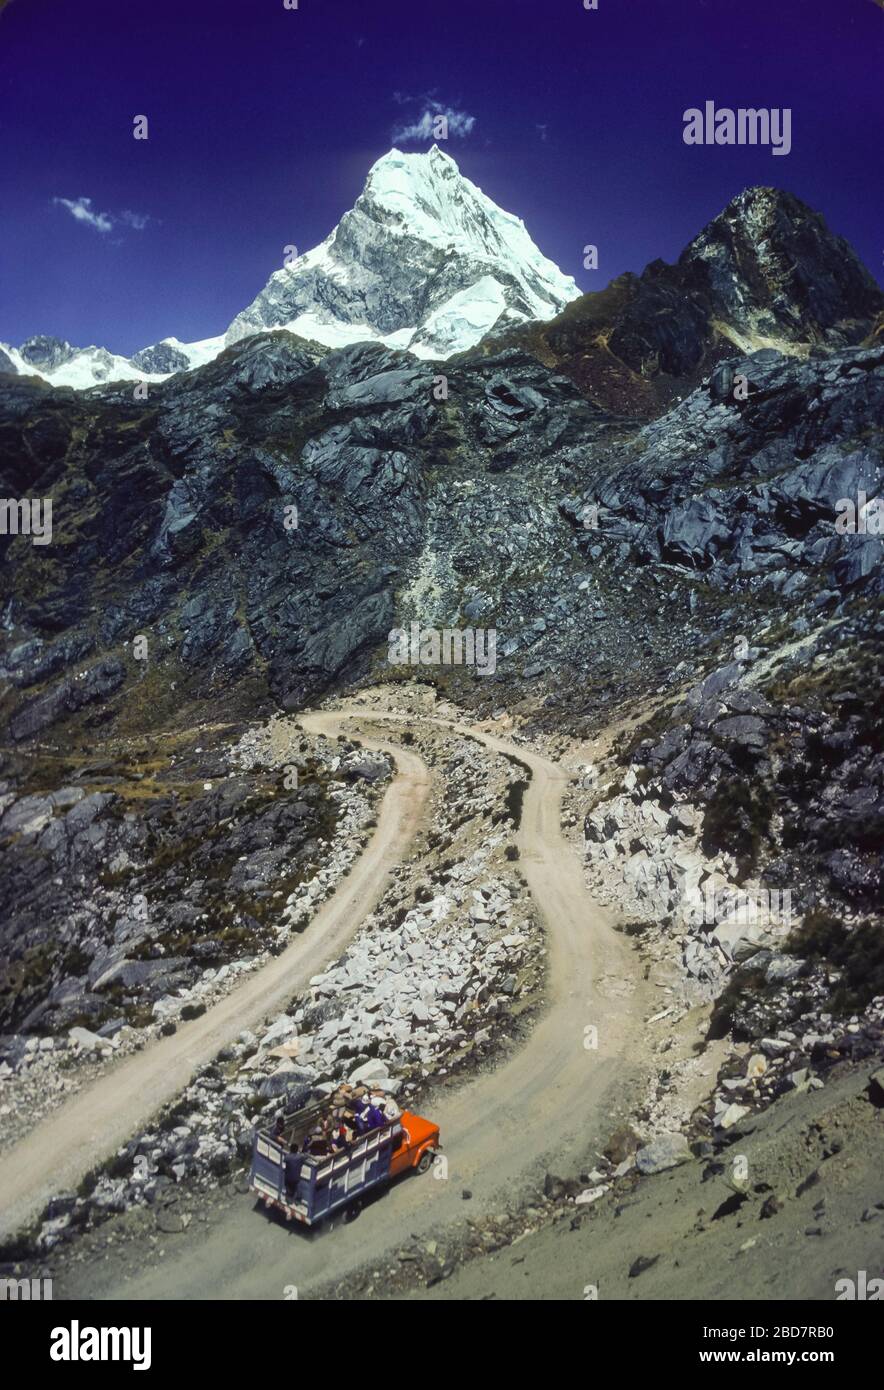 CORDILLERA BLANCA, ANCASH, PERU - Truck on switchback road and Chopicalqui Mountain, 20,847 feet, in Andes mountains. Stock Photo